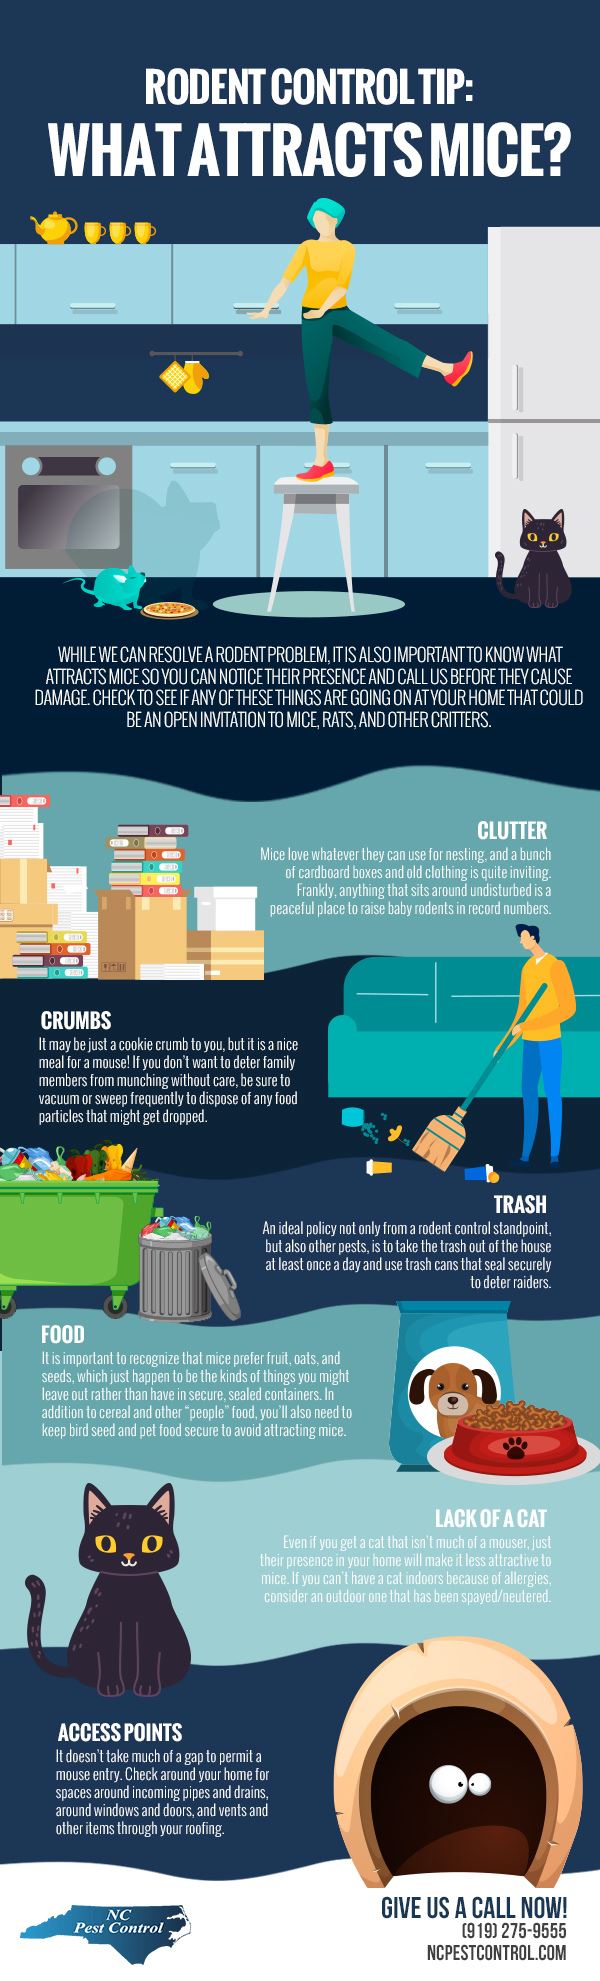 Rodent Control Tip: What Attracts Mice? [infographic]